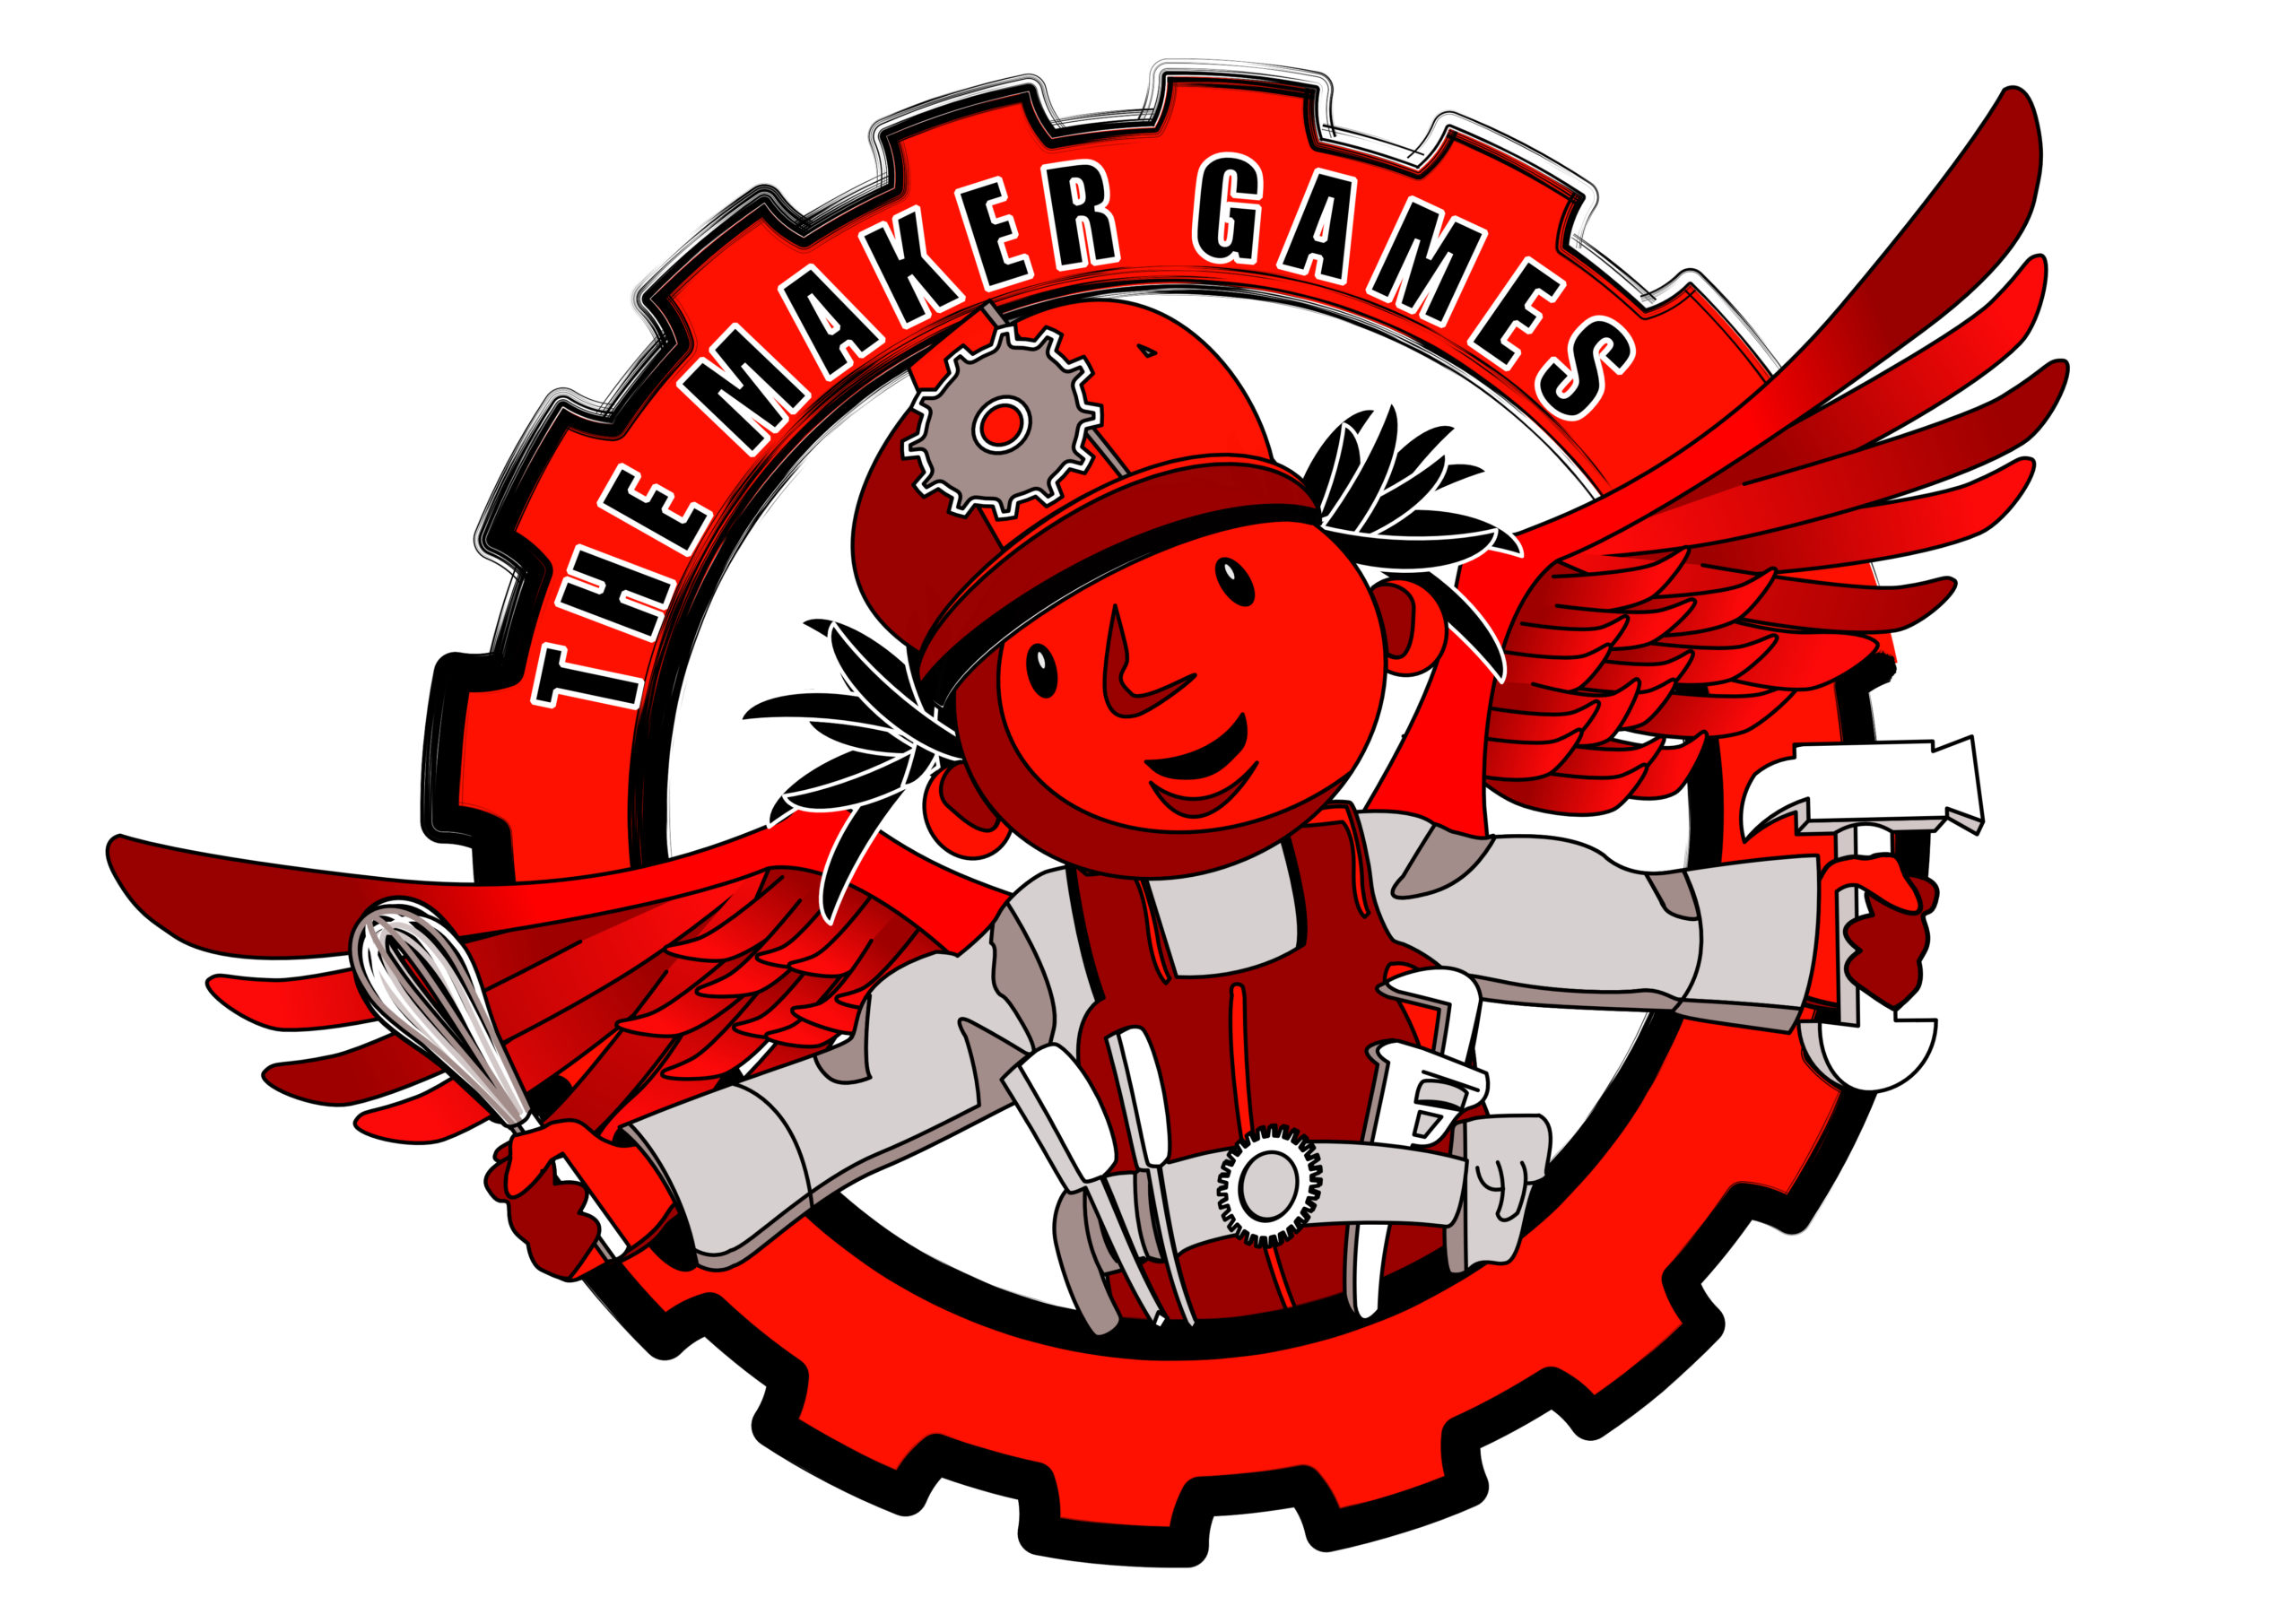 The Maker games